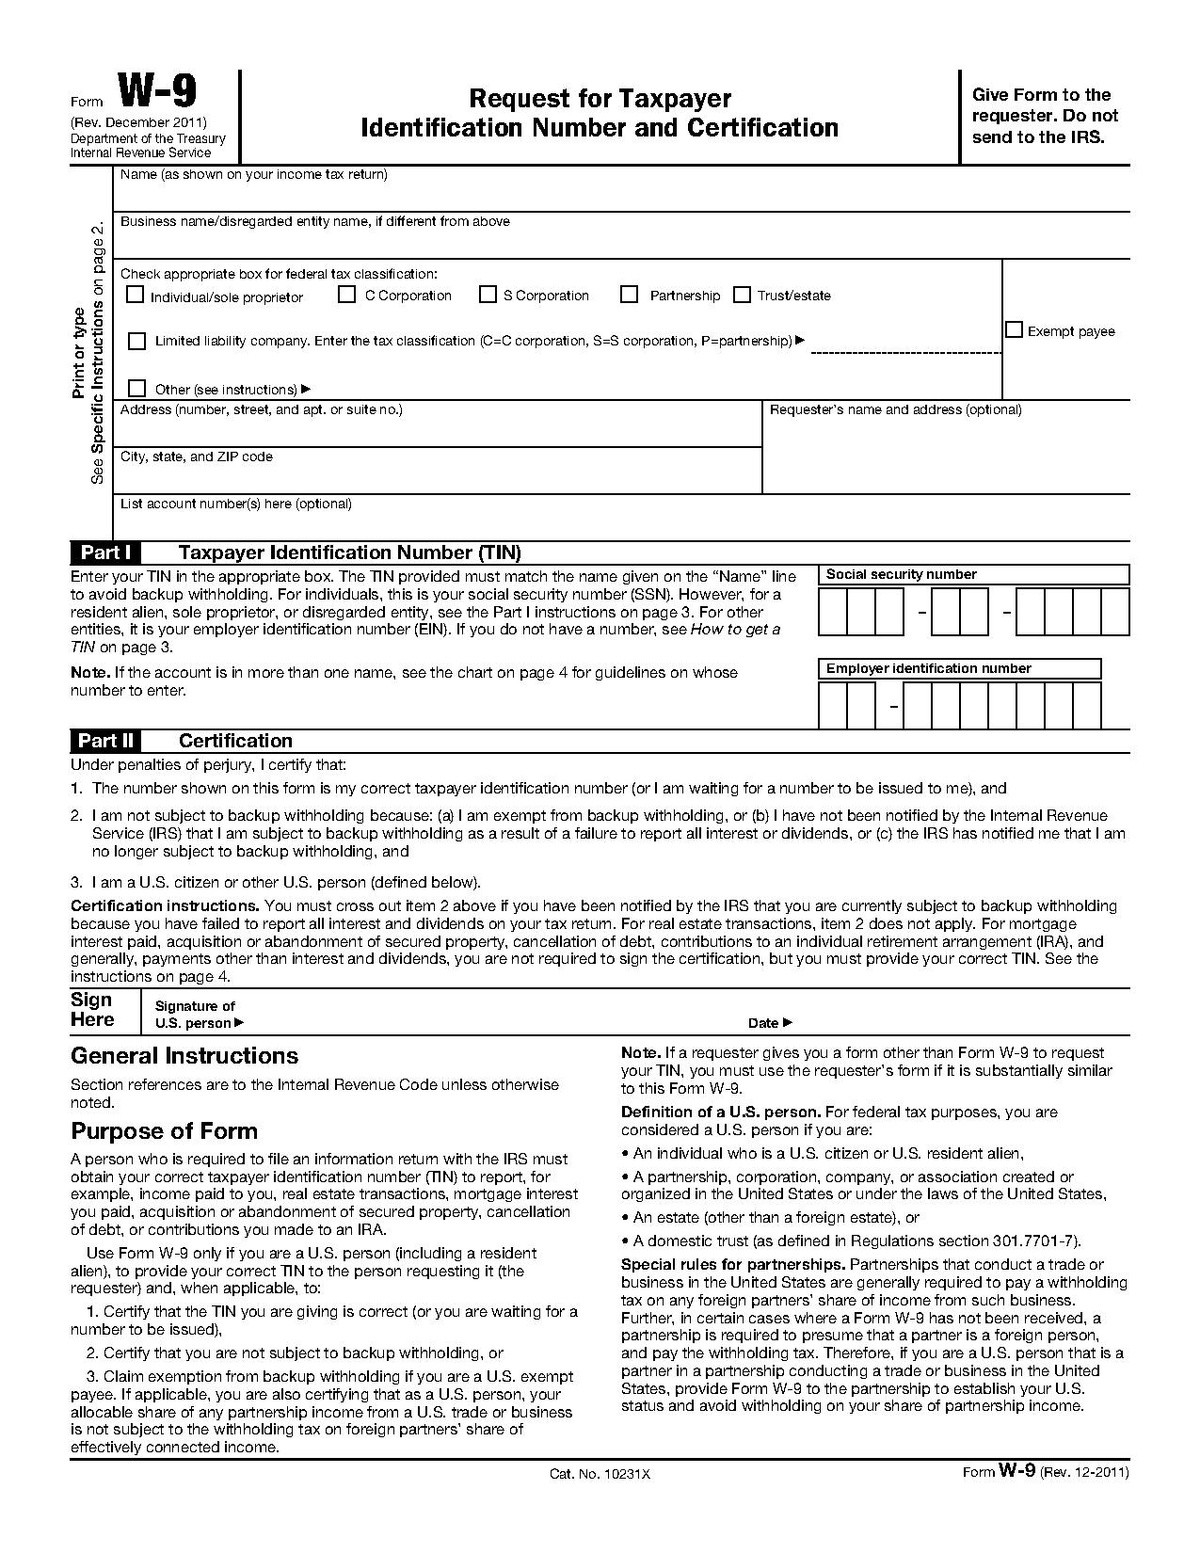 W9 Tax Form Printable - New Printable Form &amp; Letter For 2021-Printable Blank 2021 W 9 Form